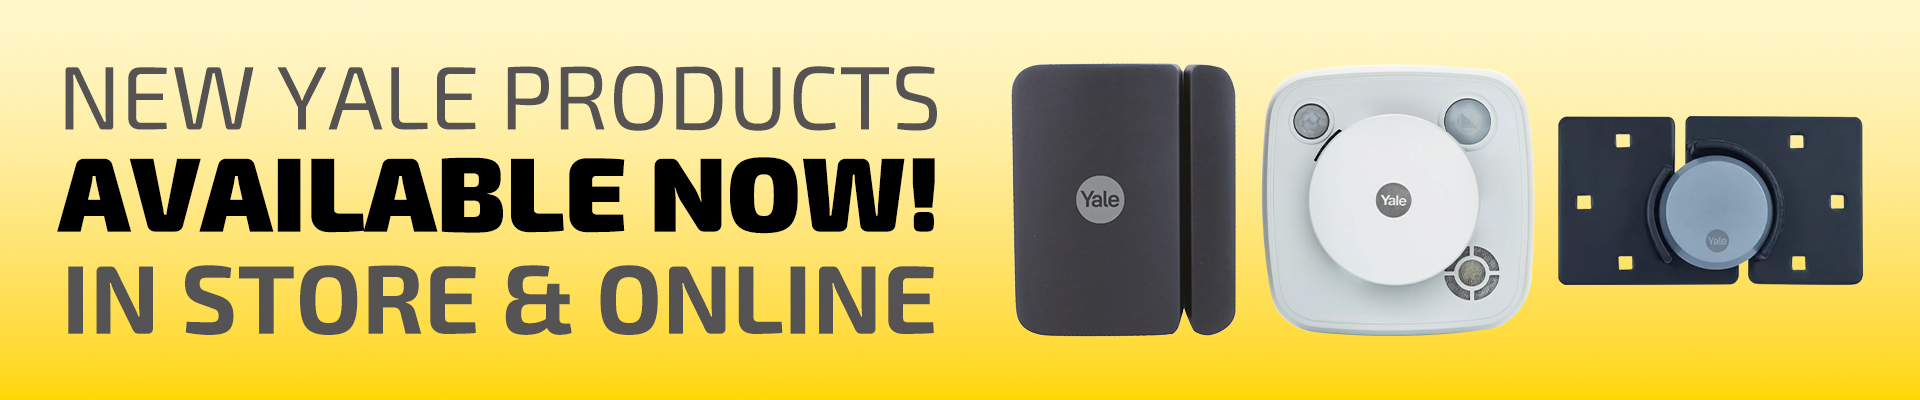 New Yale Products are now available!